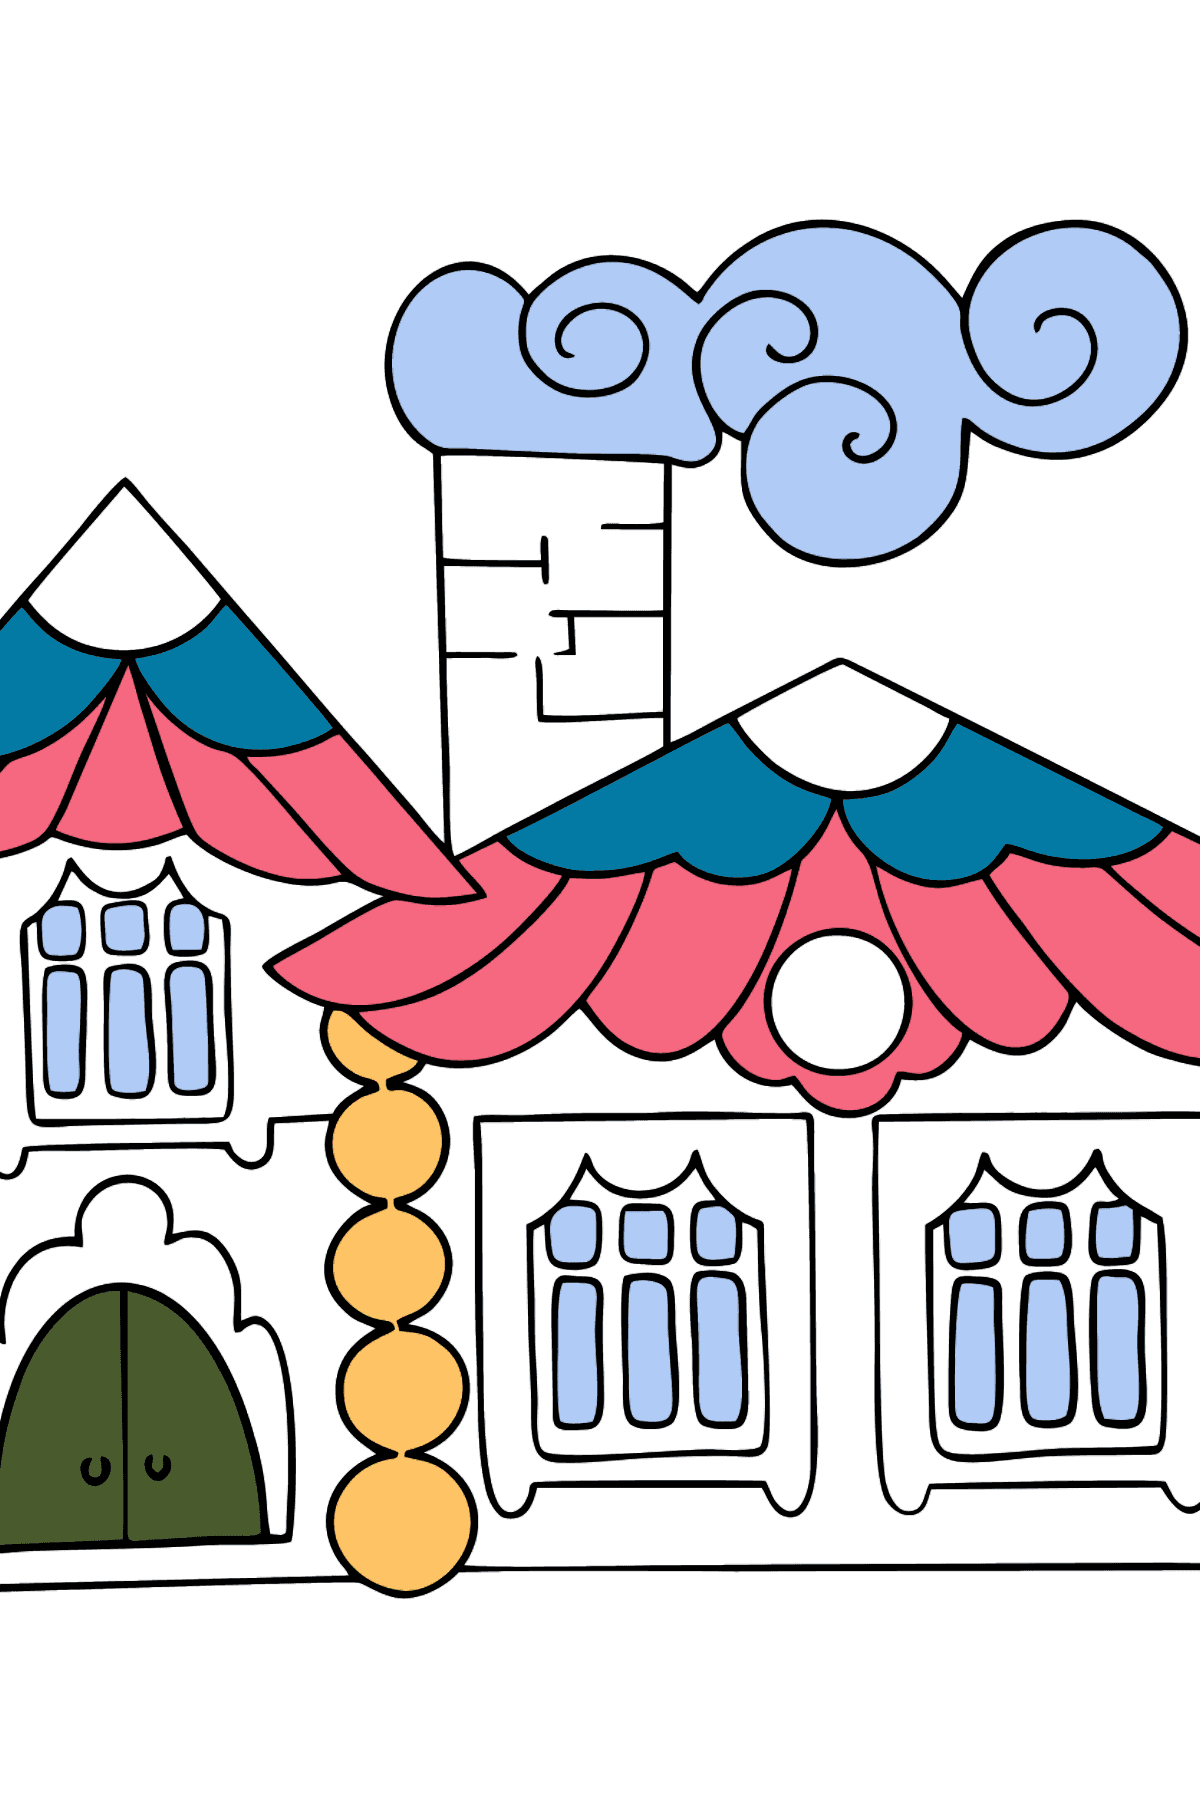 House in the Forest Coloring Page (difficult) - Coloring Pages for Kids